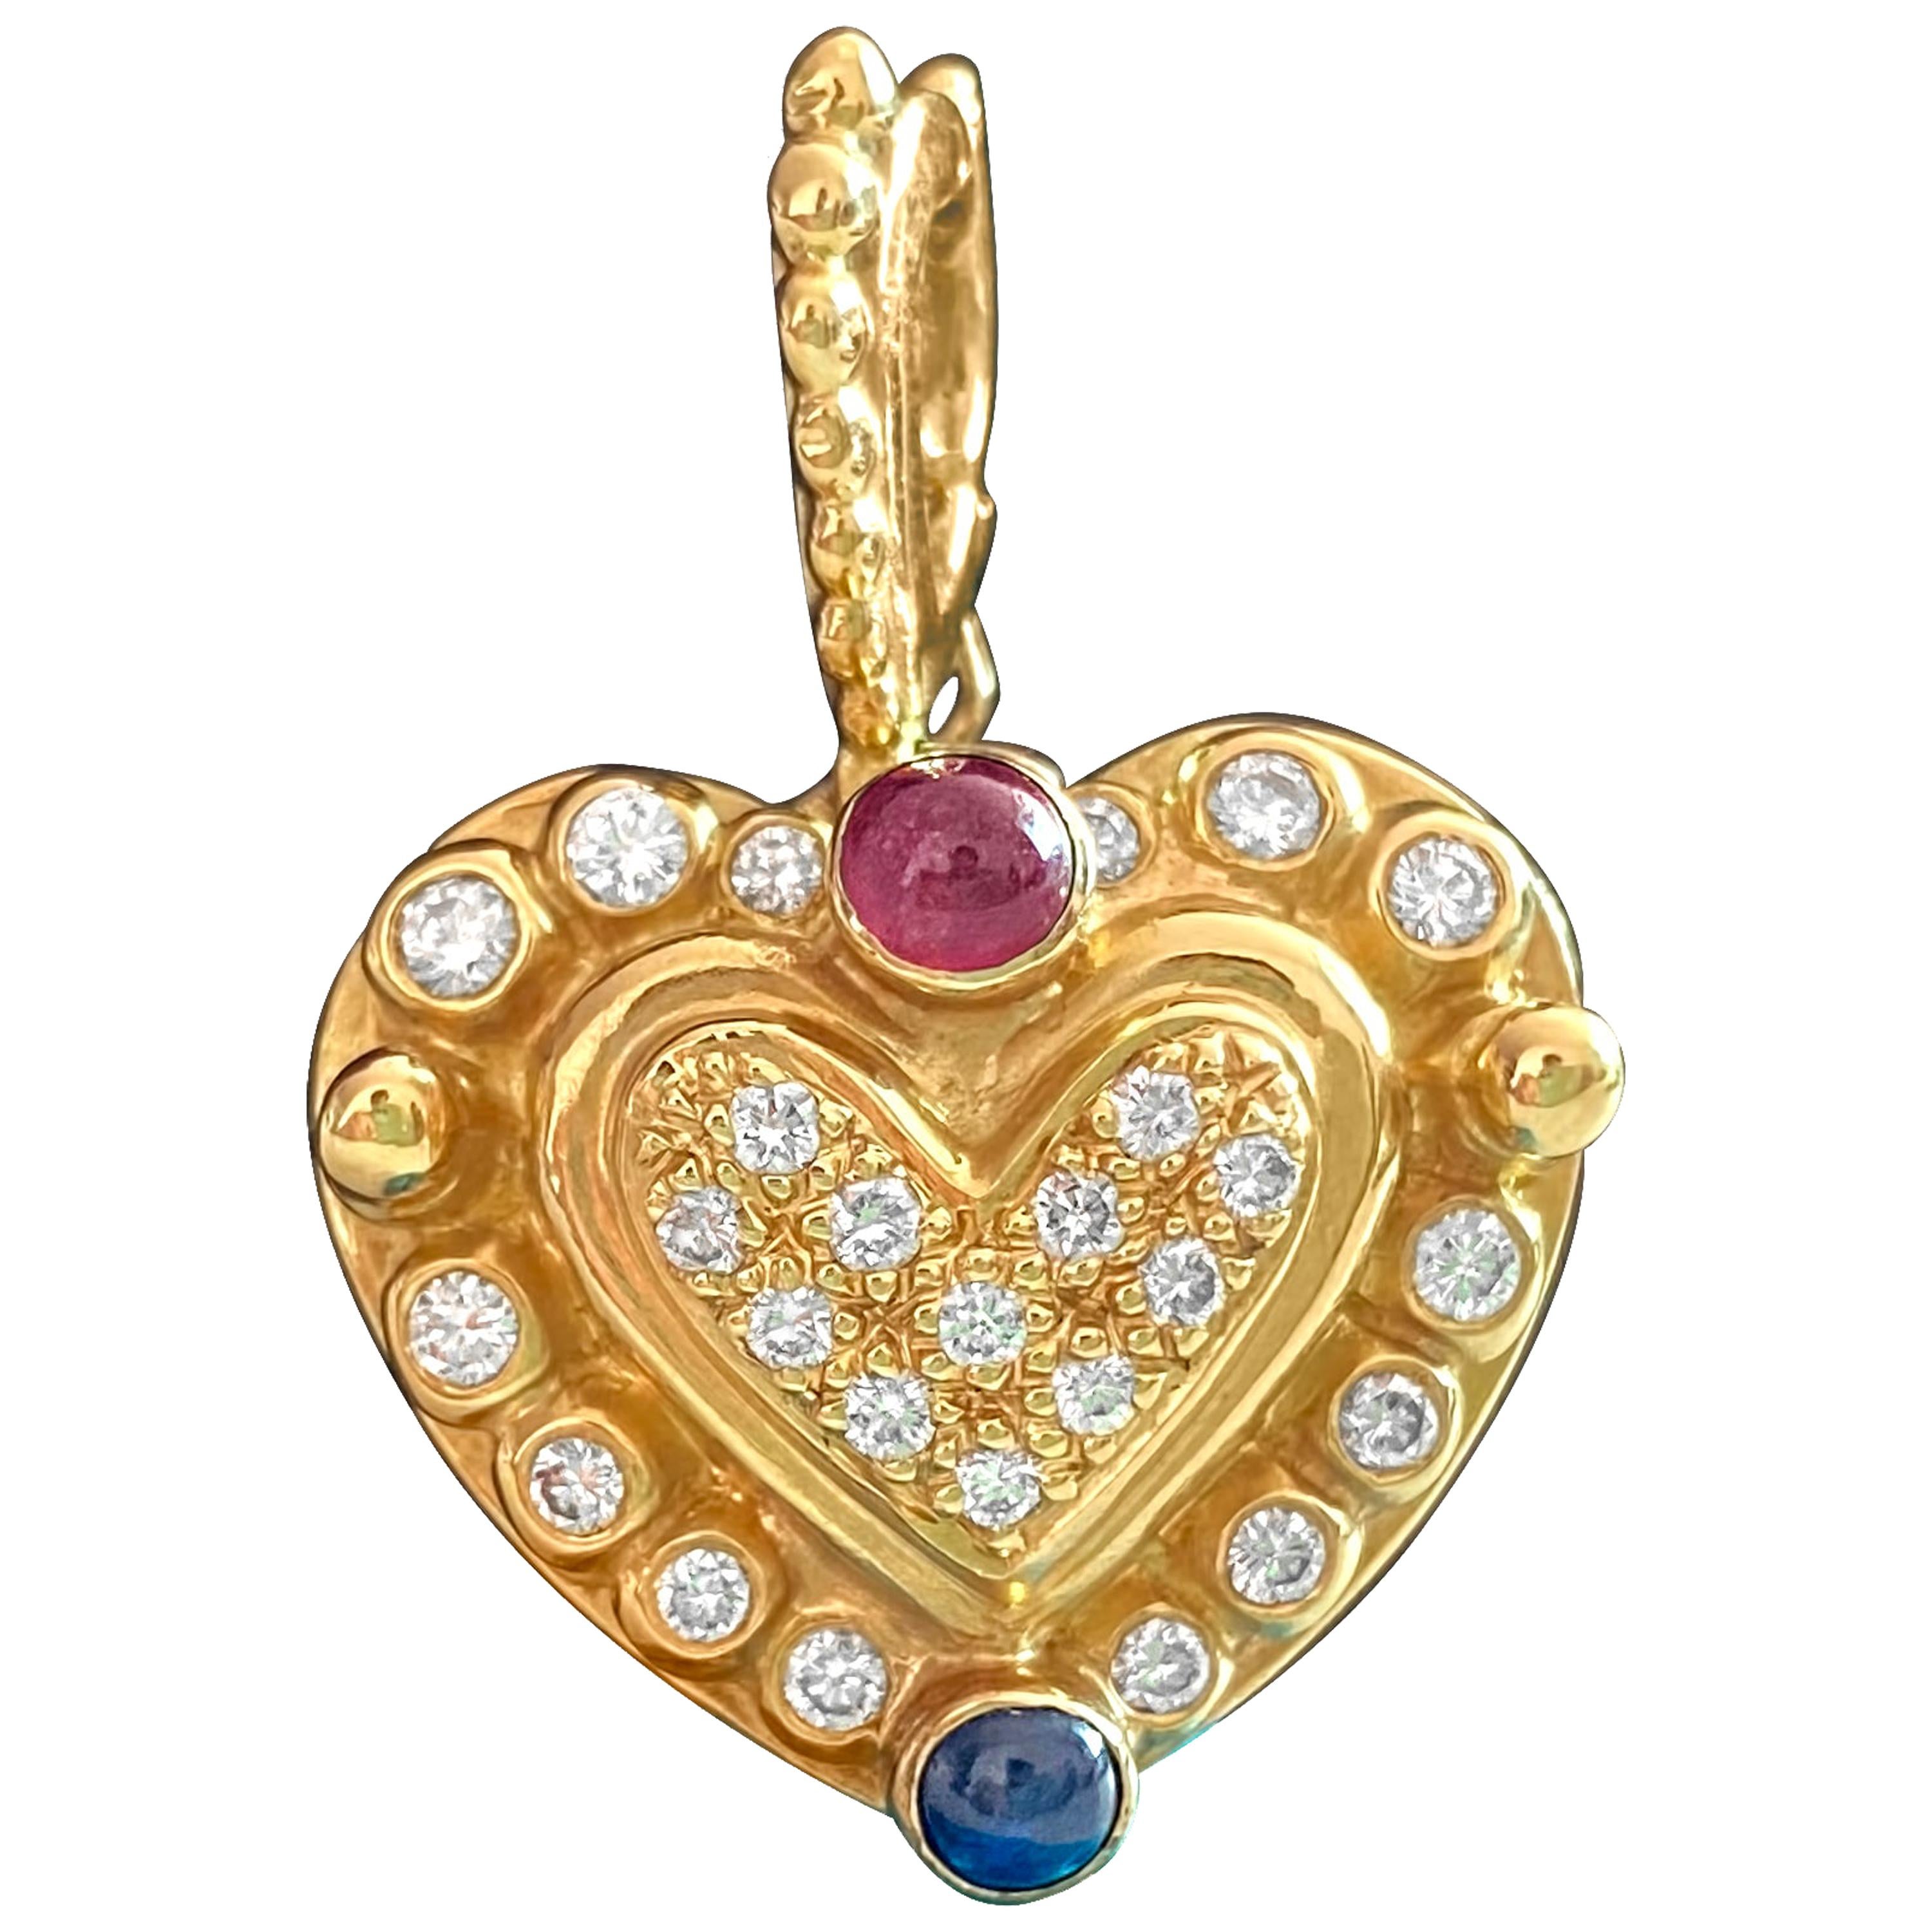 Vintage Natural 1.25 Carat Diamond, Ruby and Sapphire Heart Pendant for Her For Sale